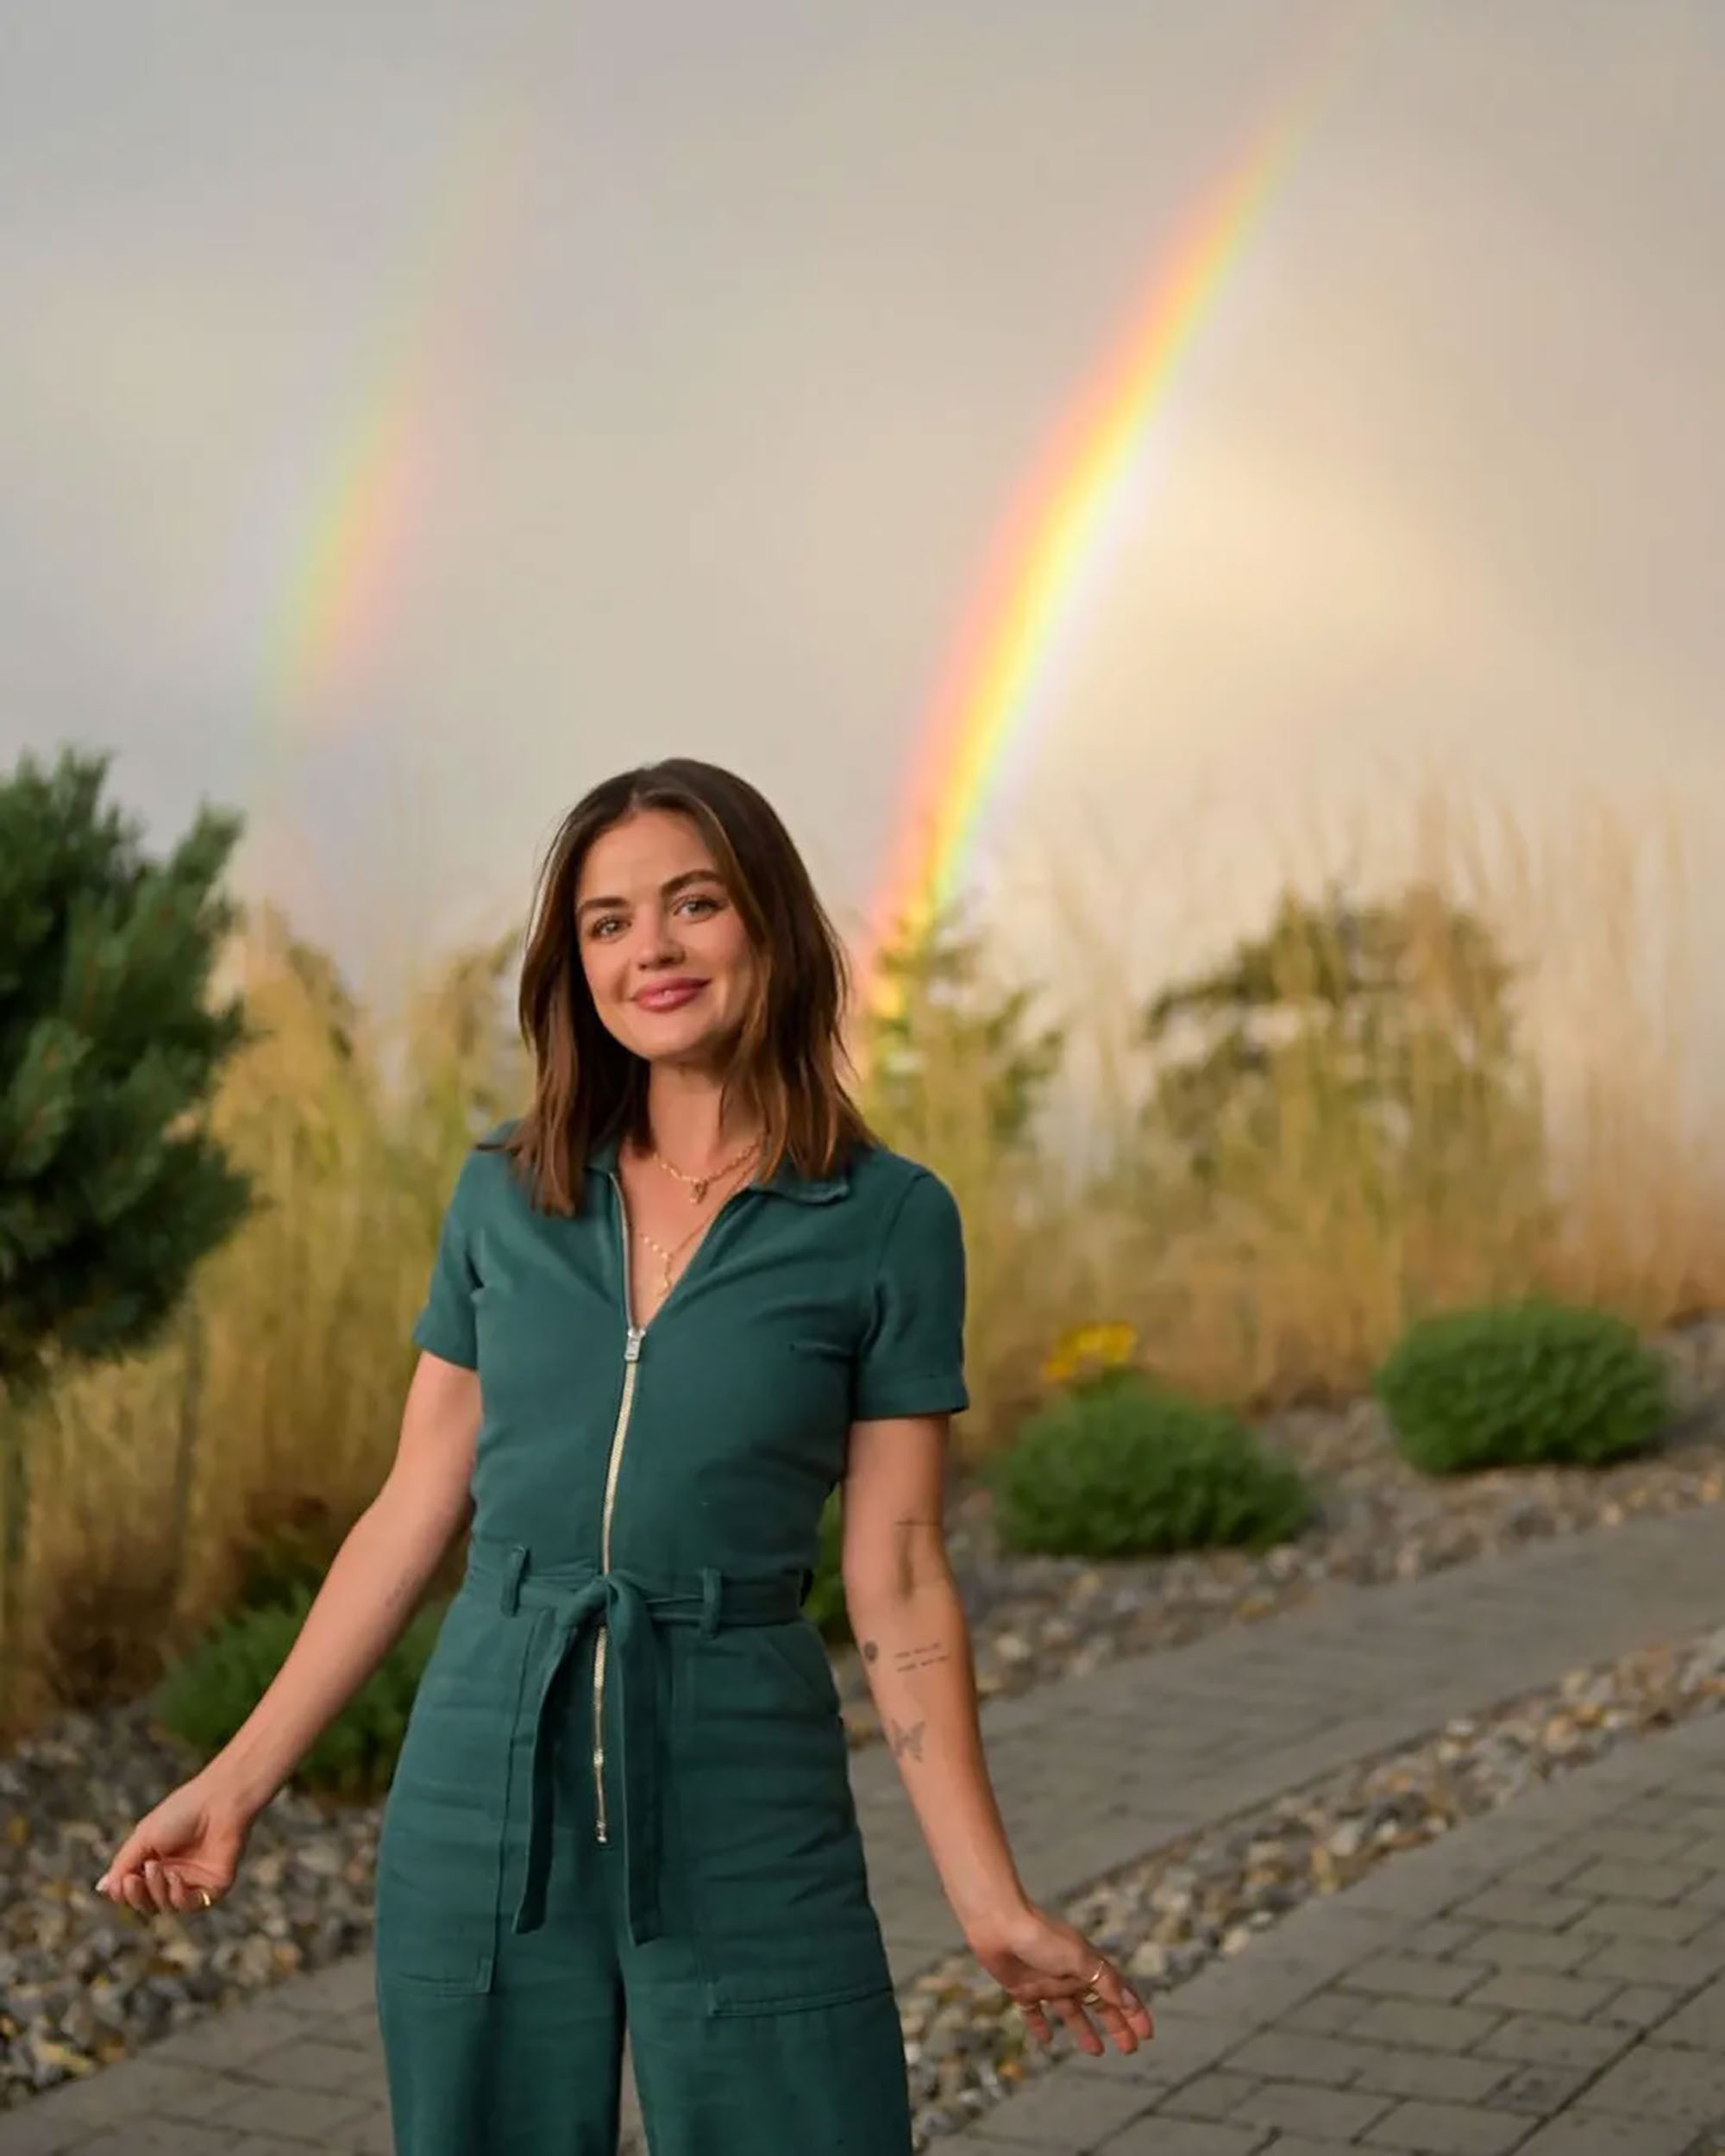 Lucy Hale says the gorgeous rainbow behind her spreads 